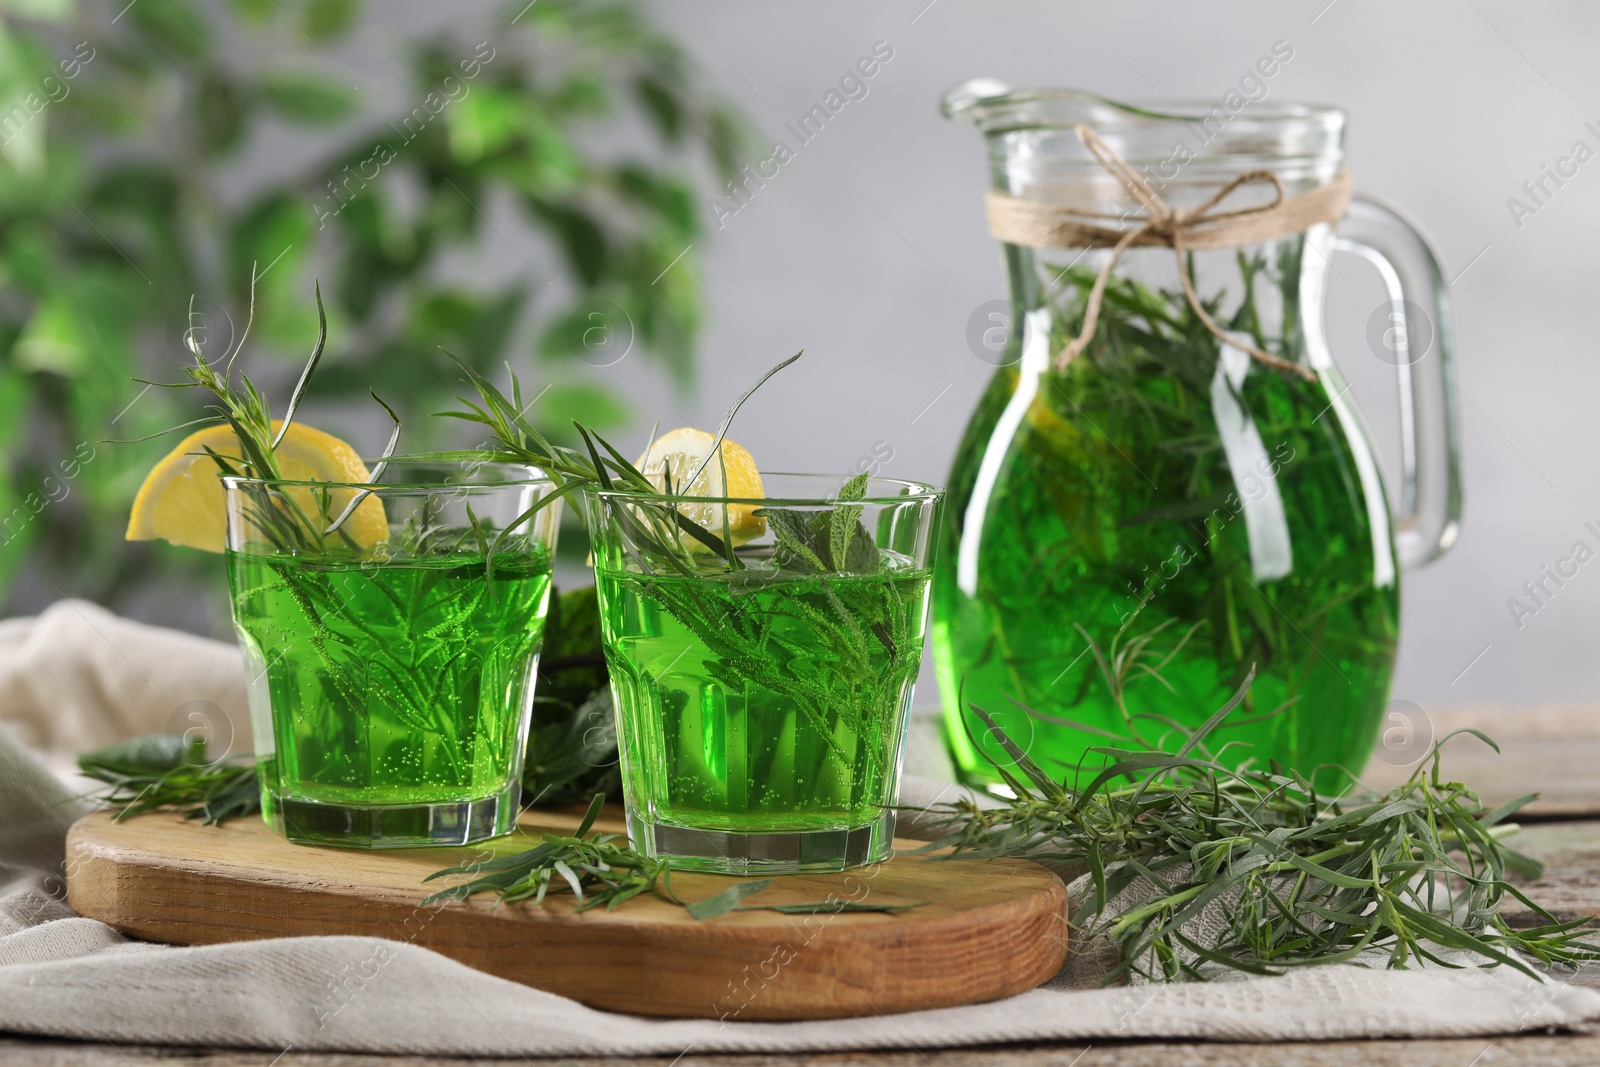 Photo of Glasses and jug of refreshing tarragon drink with lemon slices on table